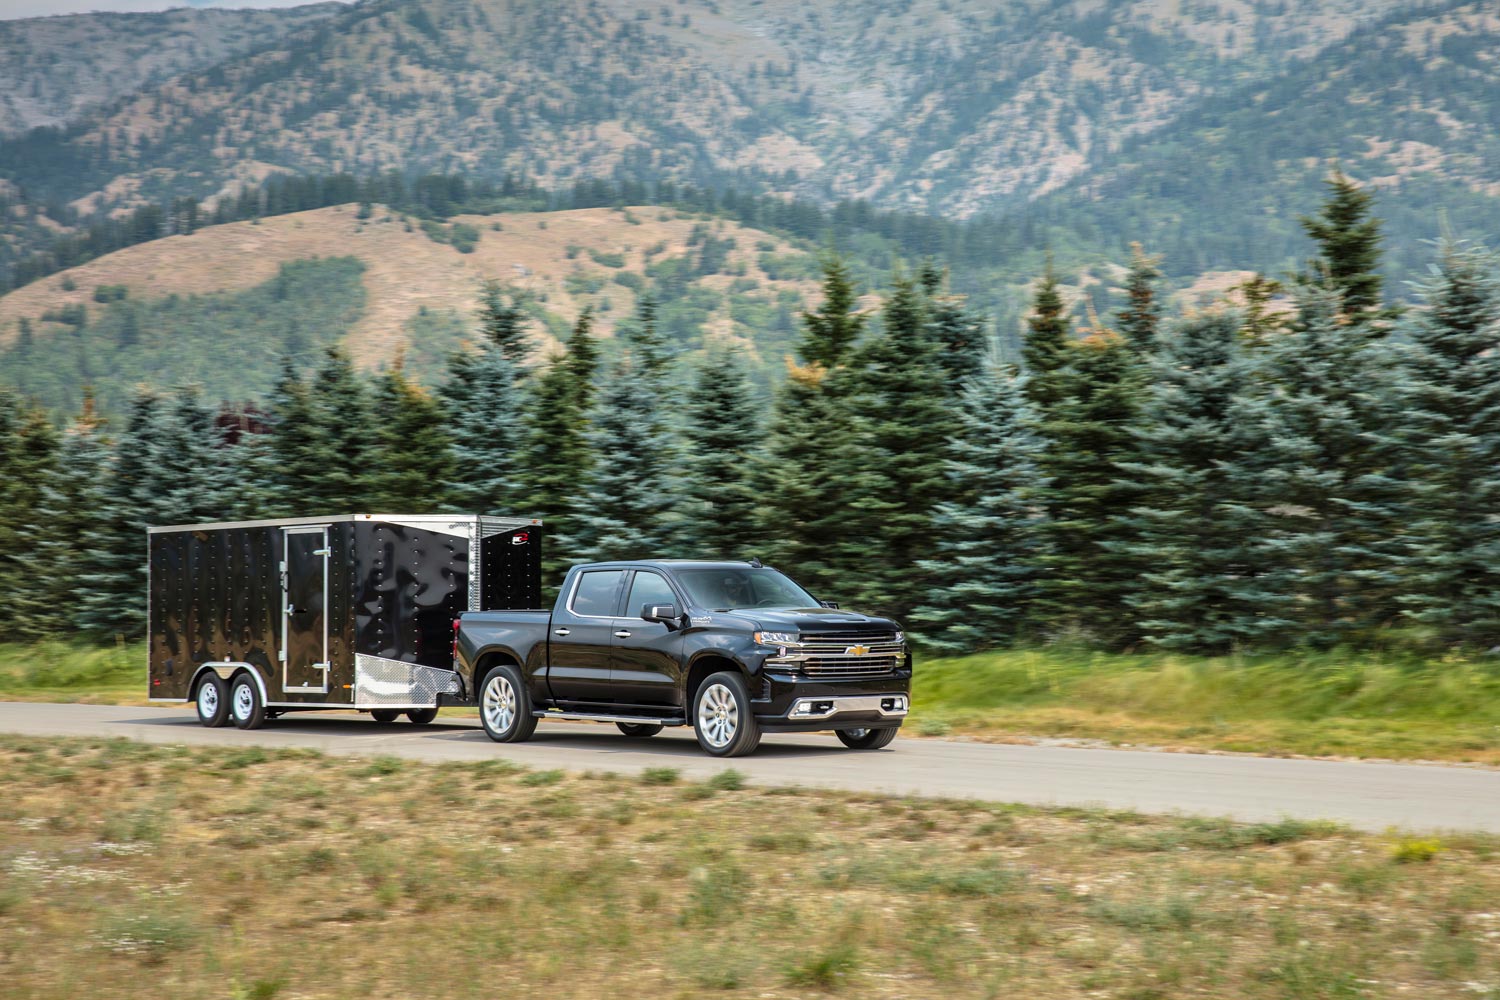 2023 Chevrolet Silverado towing an enclosed utility trailer along forest road.